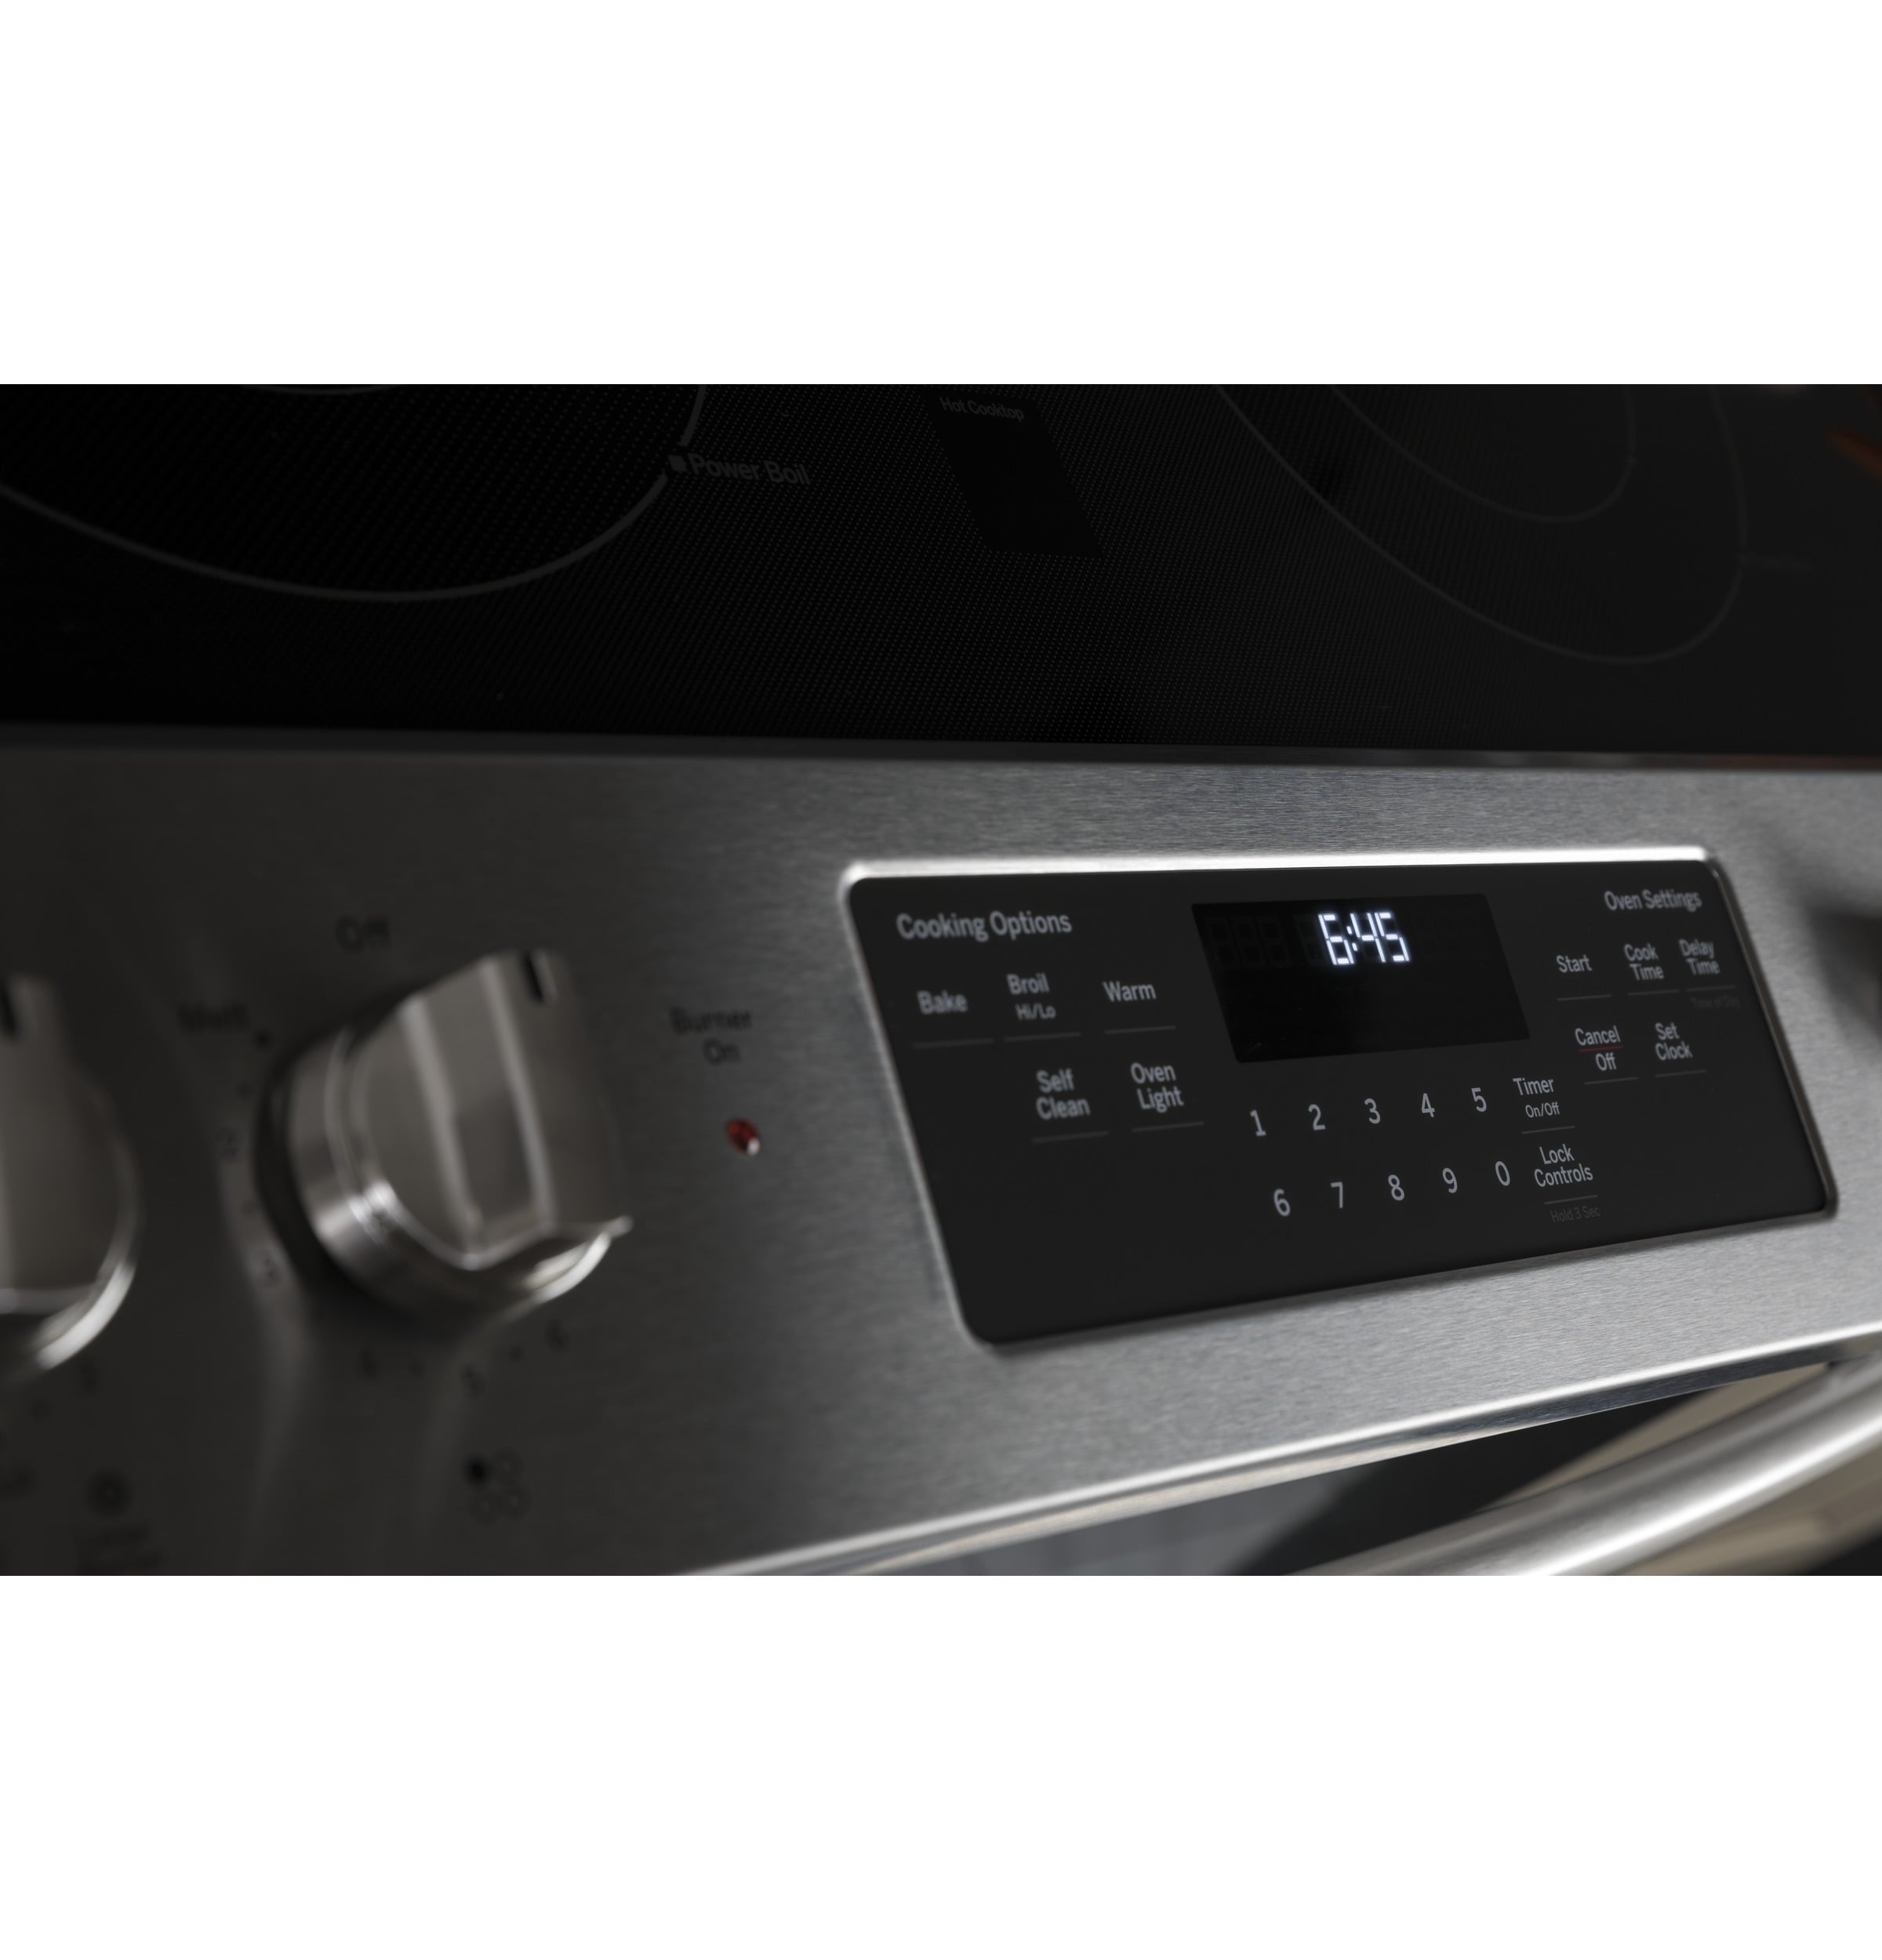 GE JS645SLSS Electric Range Review - Reviewed